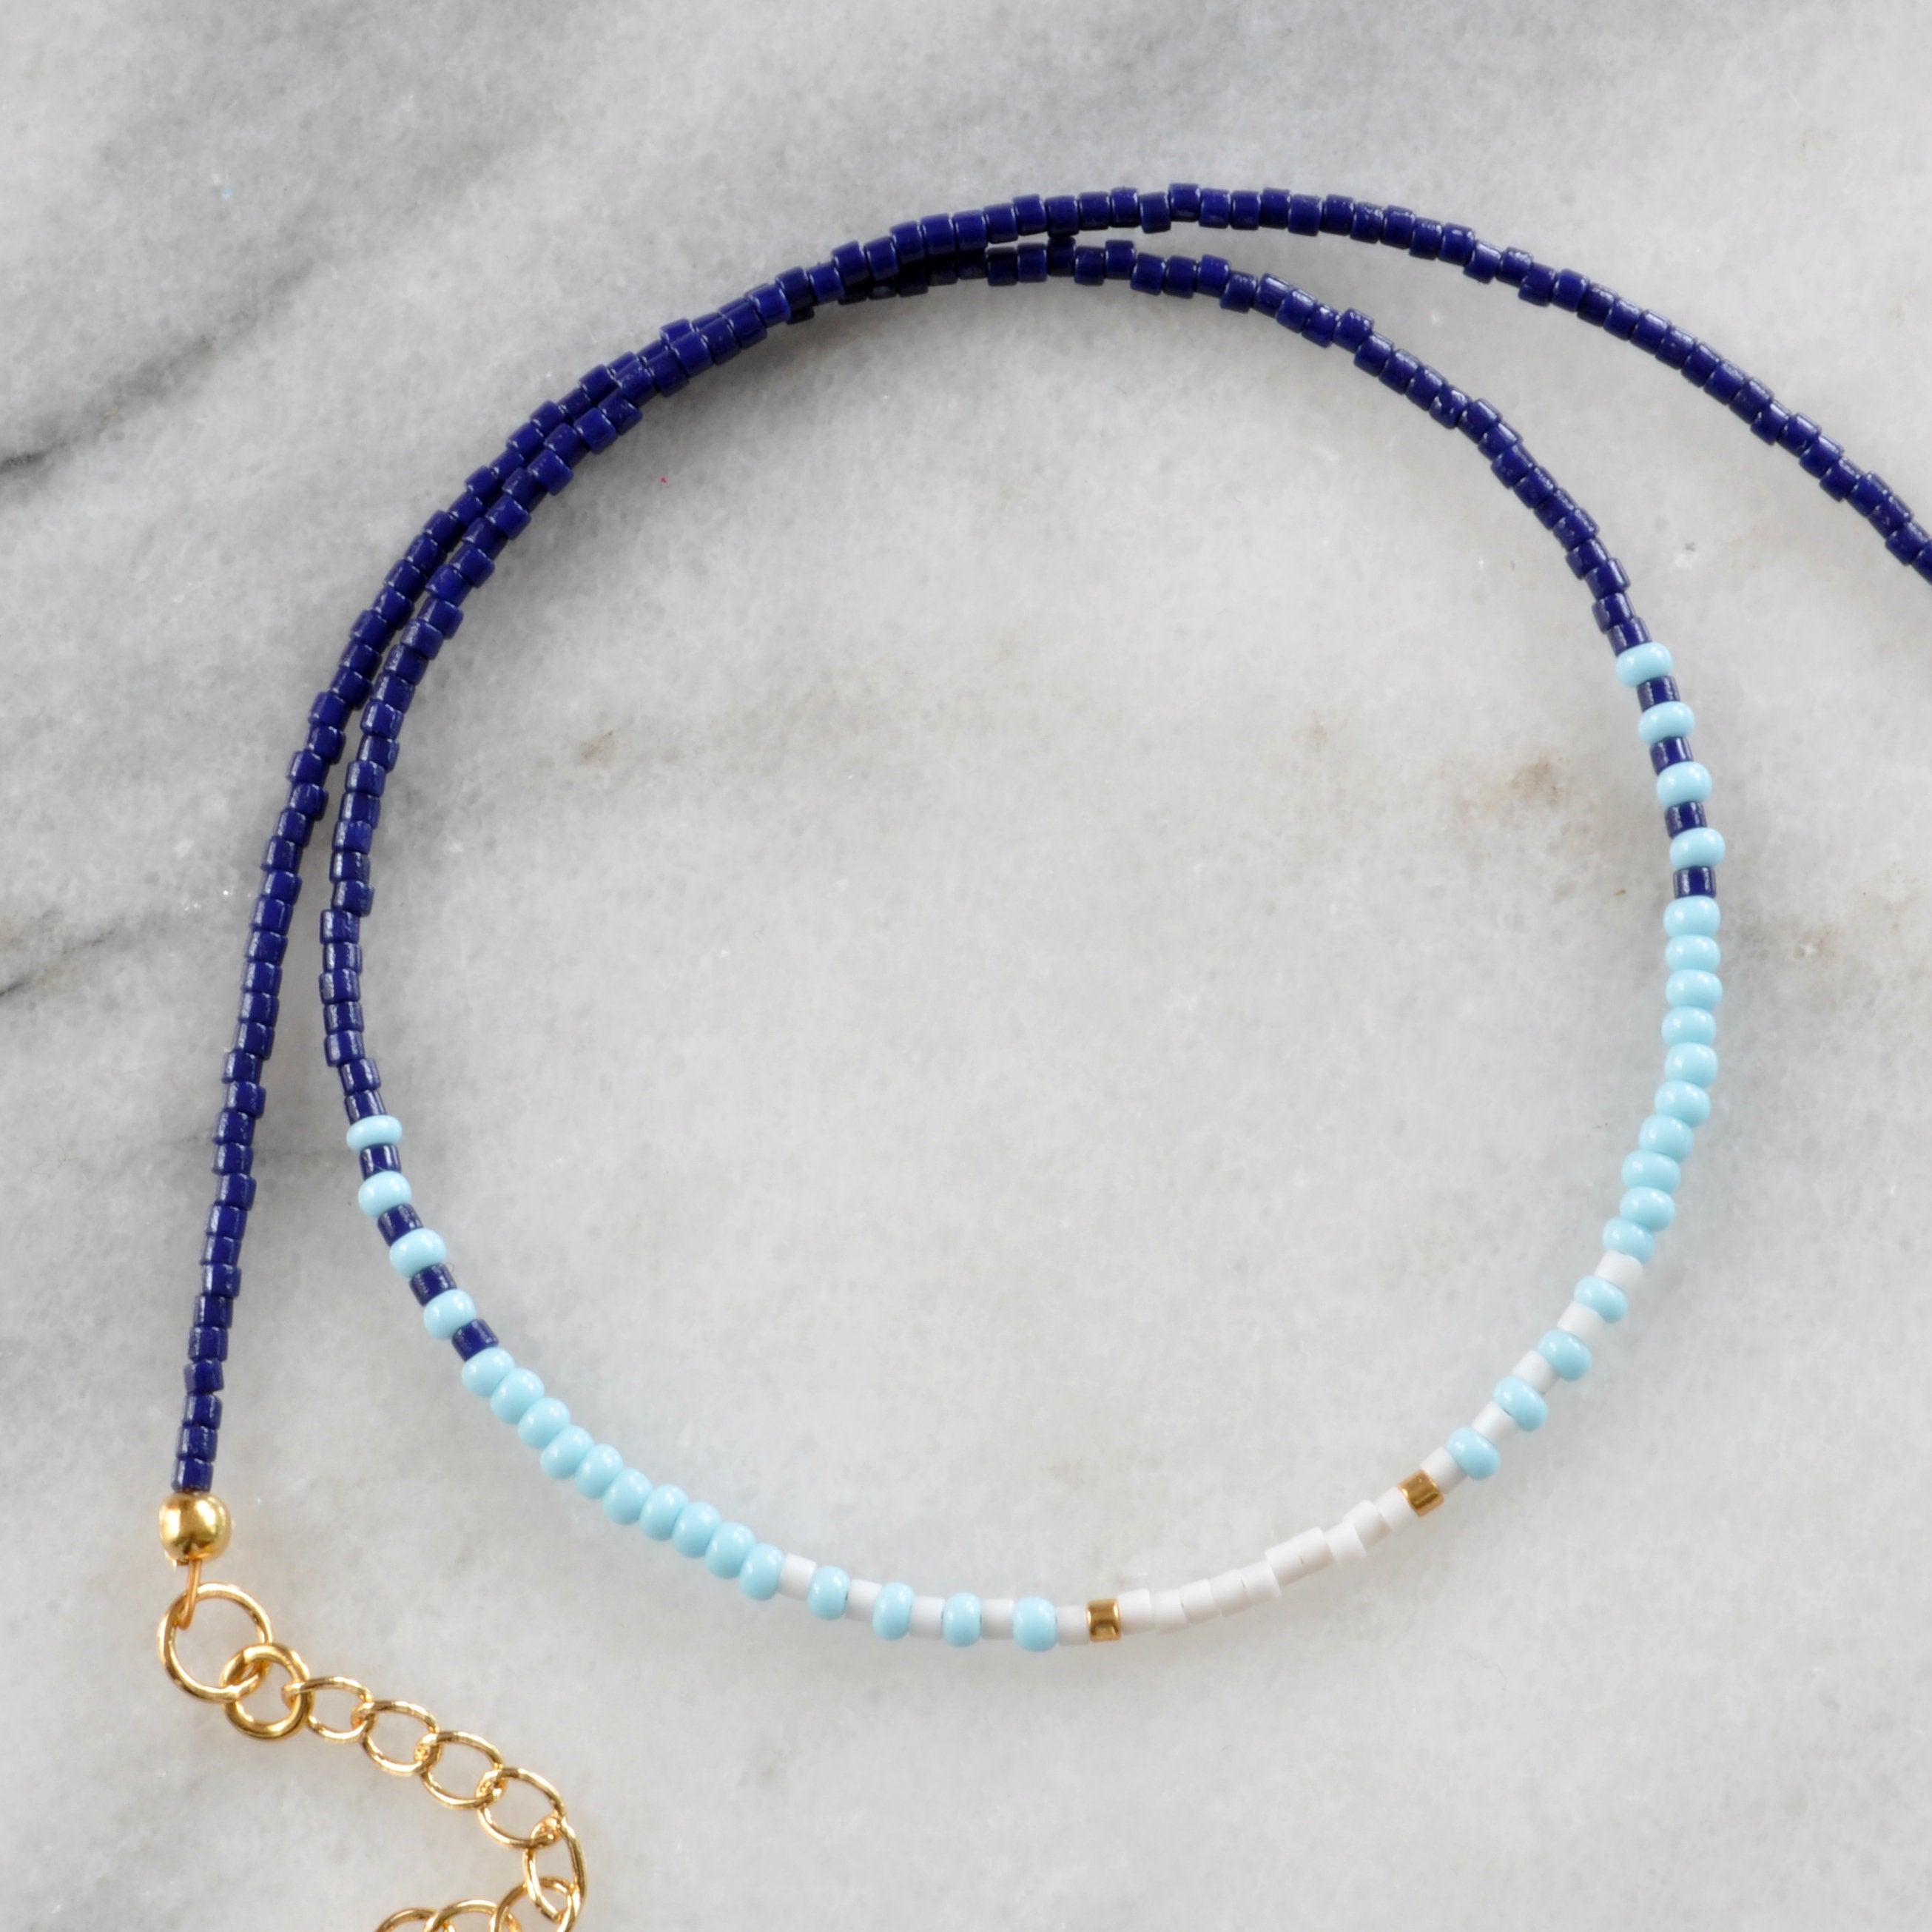 Libby & Smee Tailgate Choker Necklace in light blue navy and white, still life close up